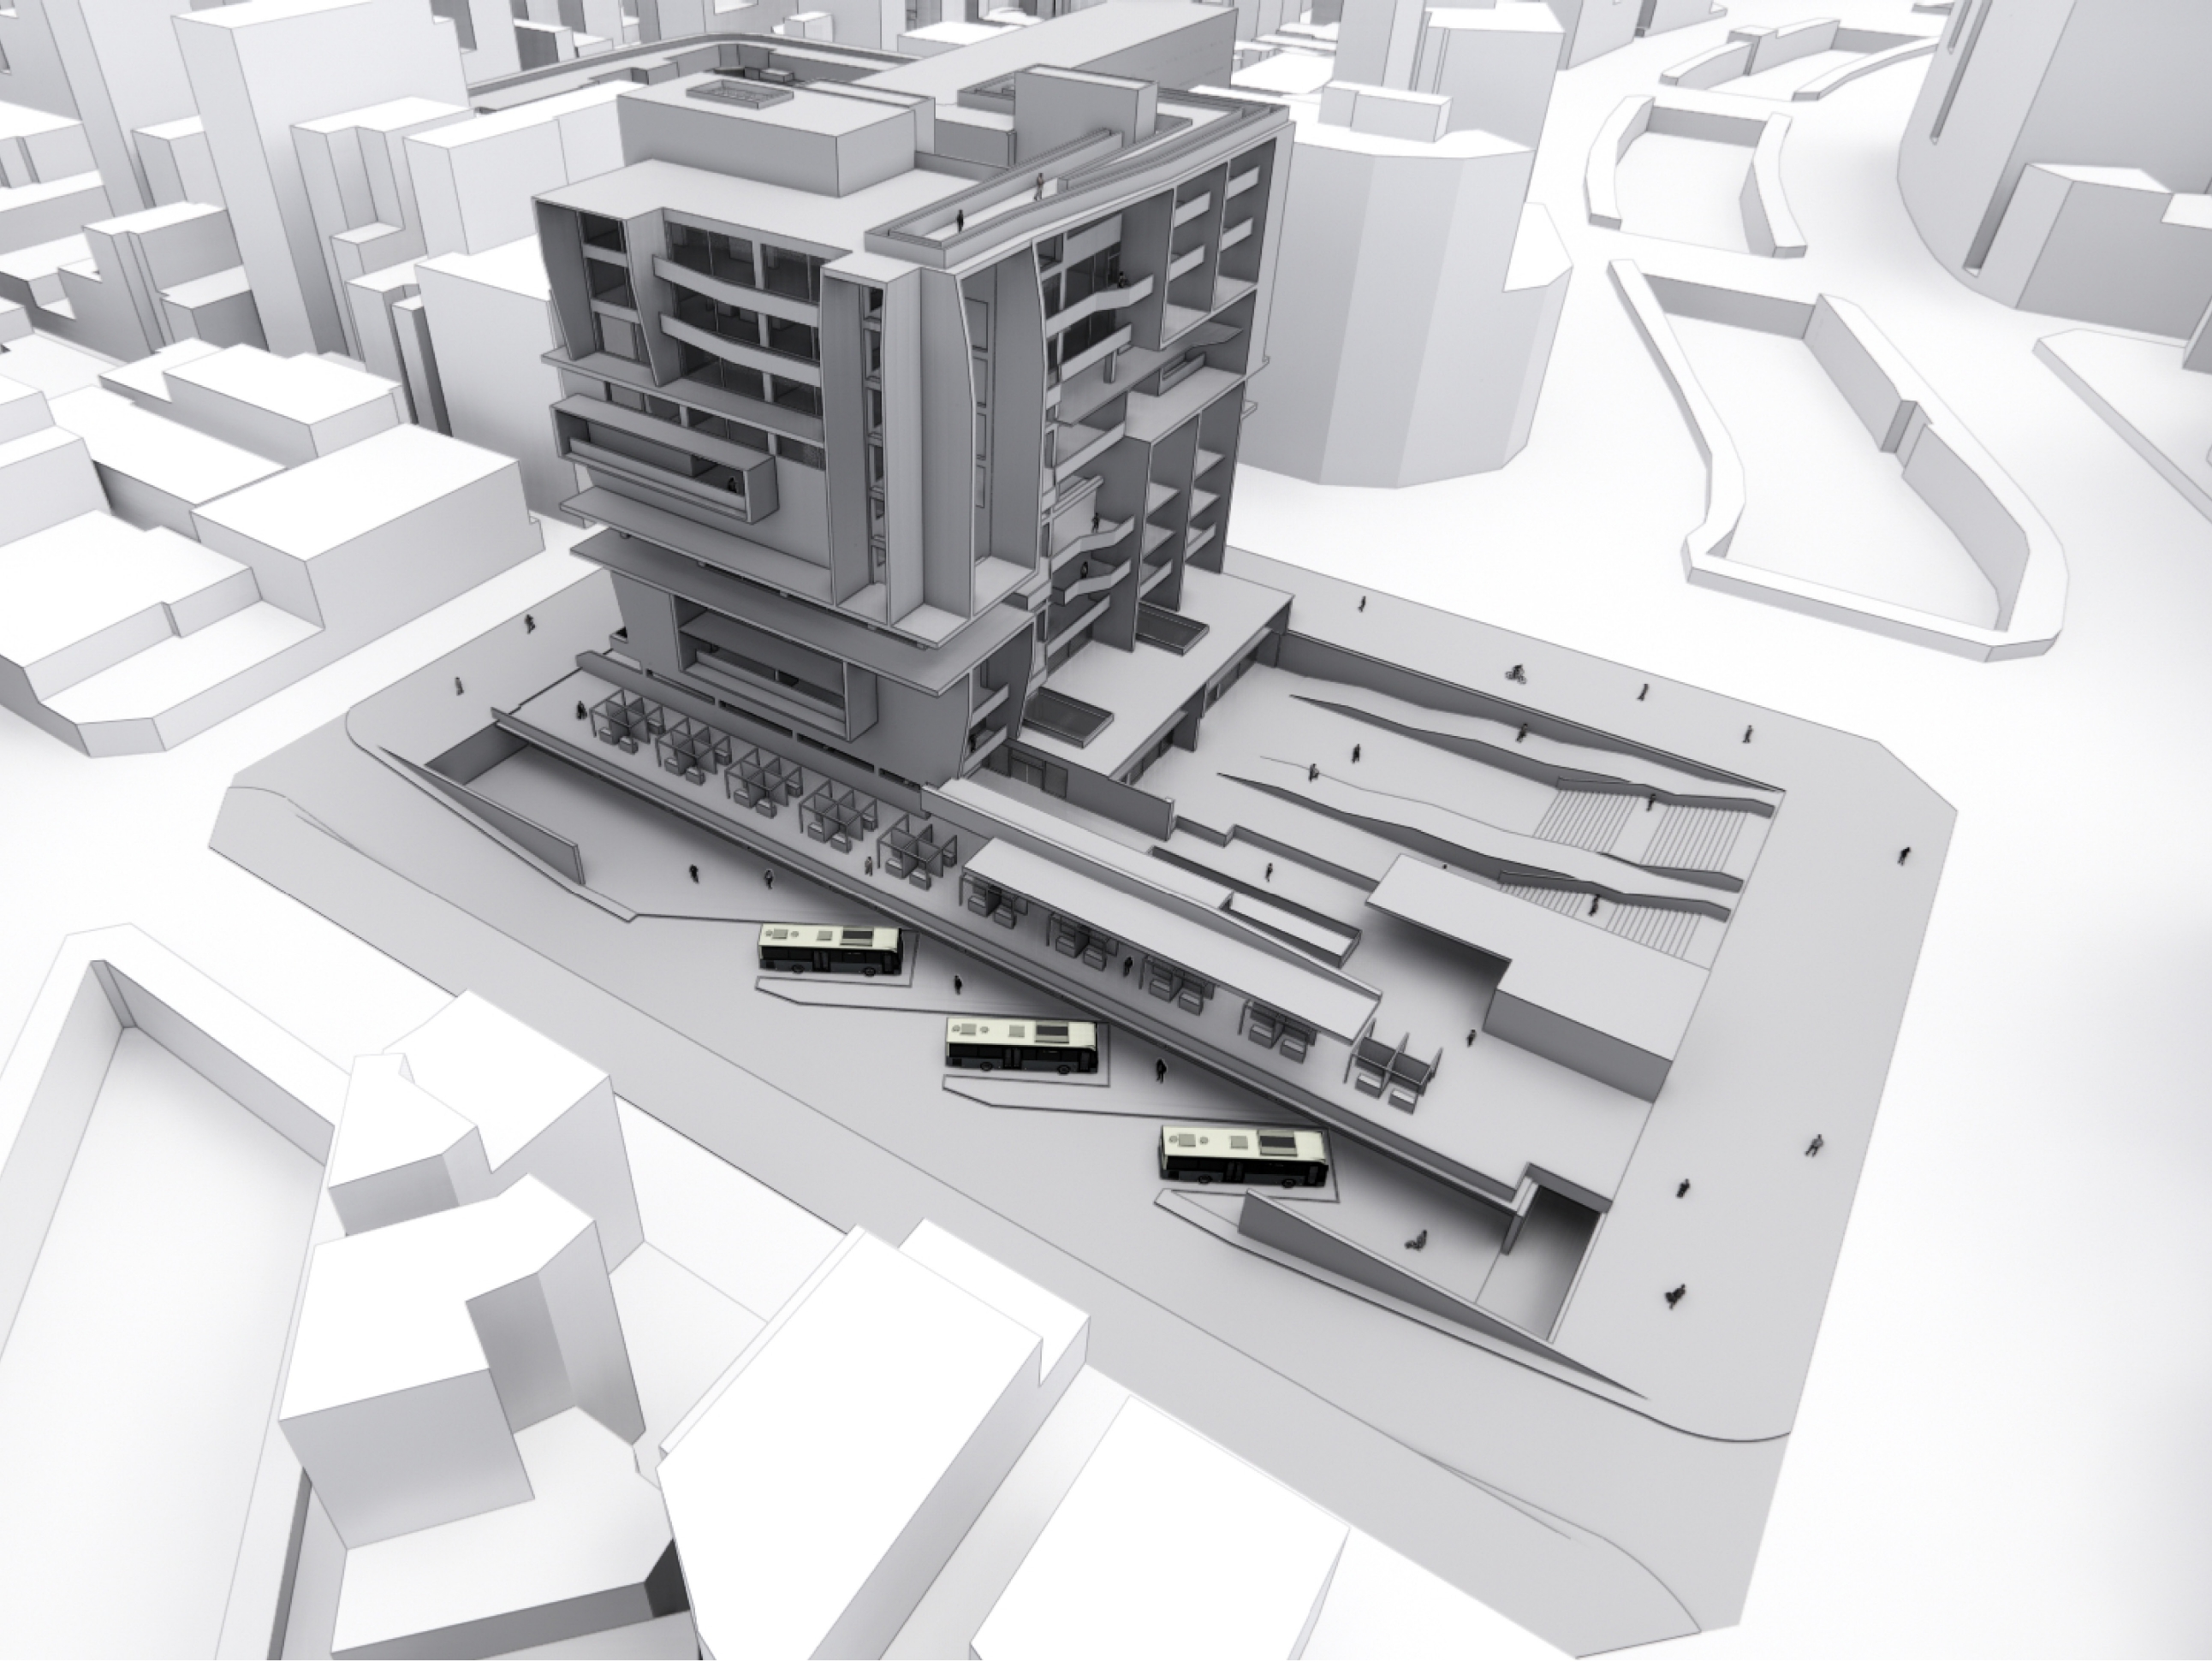 Reinventing the Old City - Experimental Reconstruction of Future Market Space